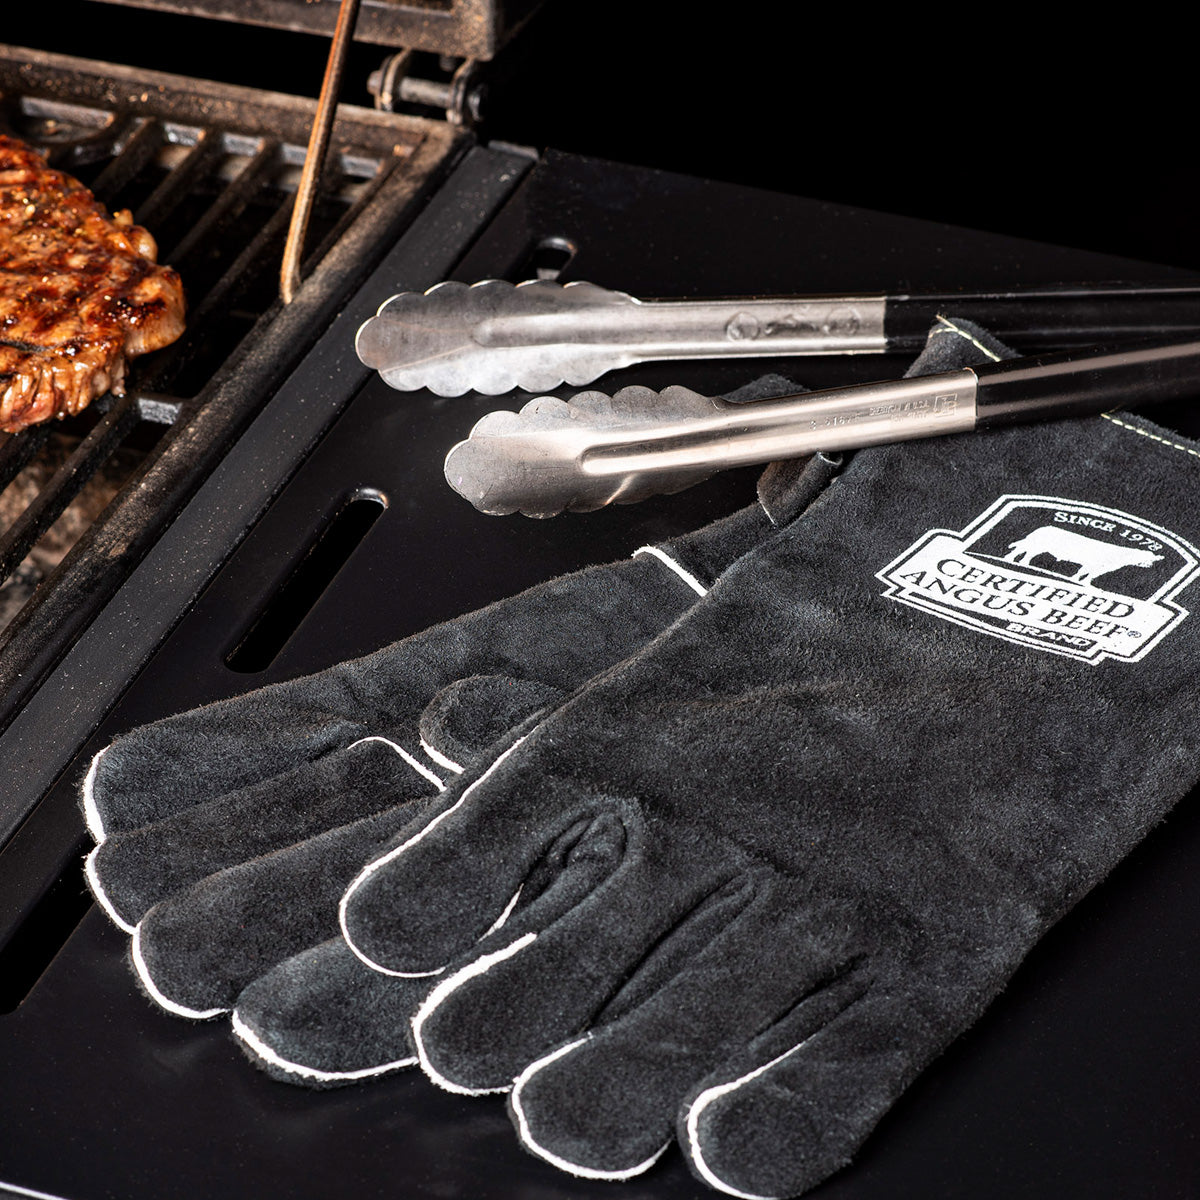 Leather Barbecue Gloves